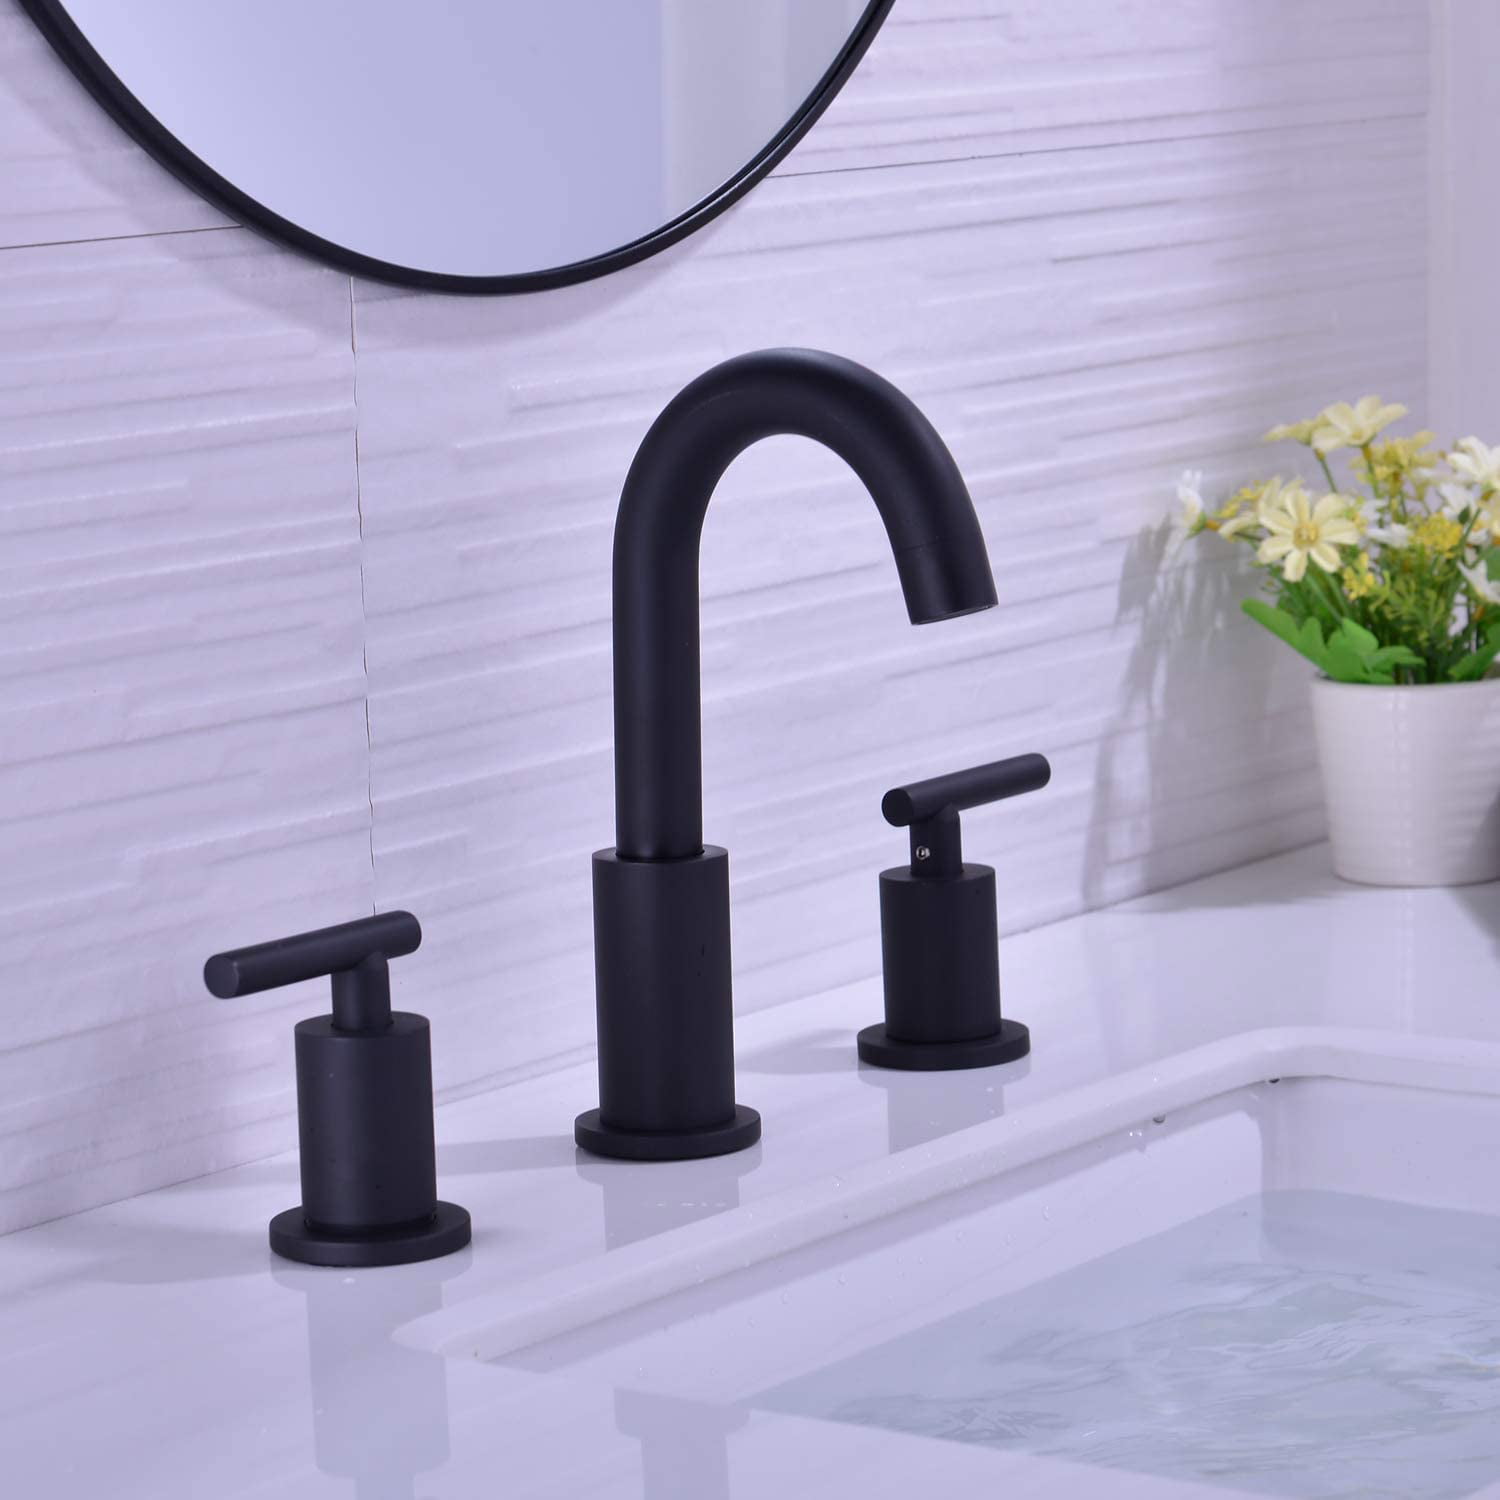 TRUSTMI Widespread 2 Handle Bathroom Basin Sink Faucet Hot and Cold Mix Set with cUPC Water Supply Hoses Oil Rubbed Bronze